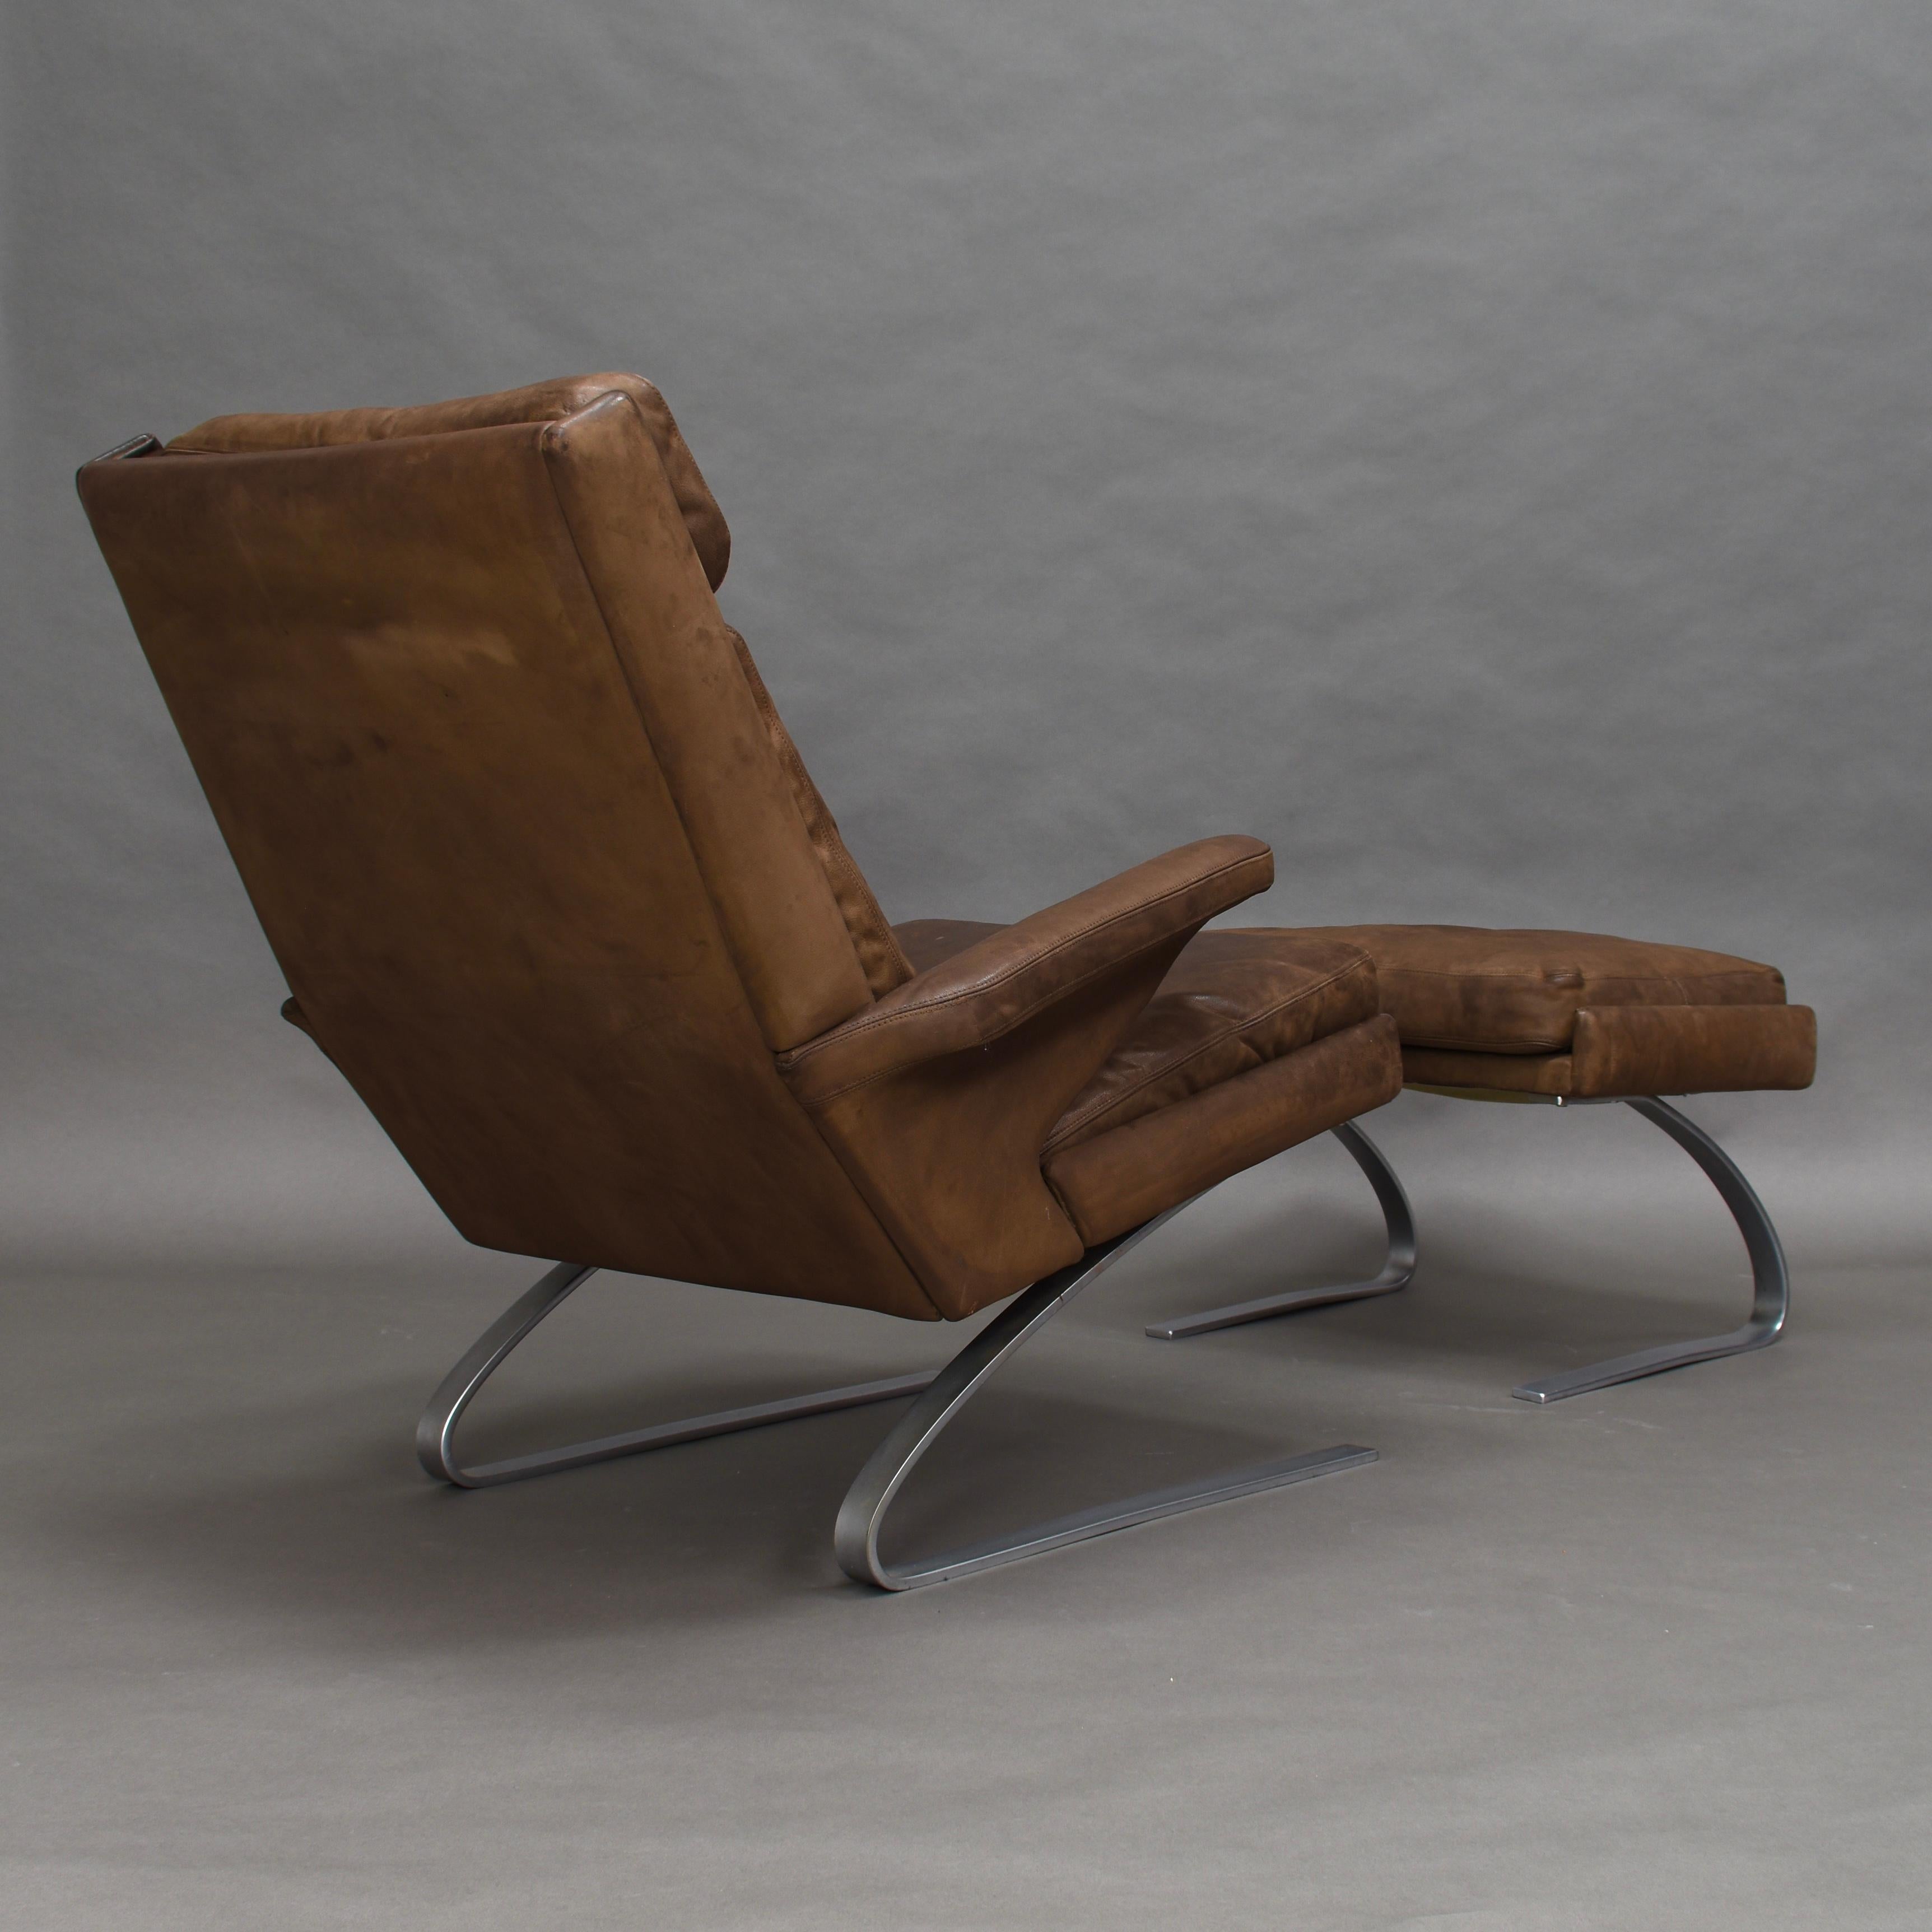 Late 20th Century Original COR Full Leather Lounge Armchair by Reinhold & Hans Schröpfer, 1976